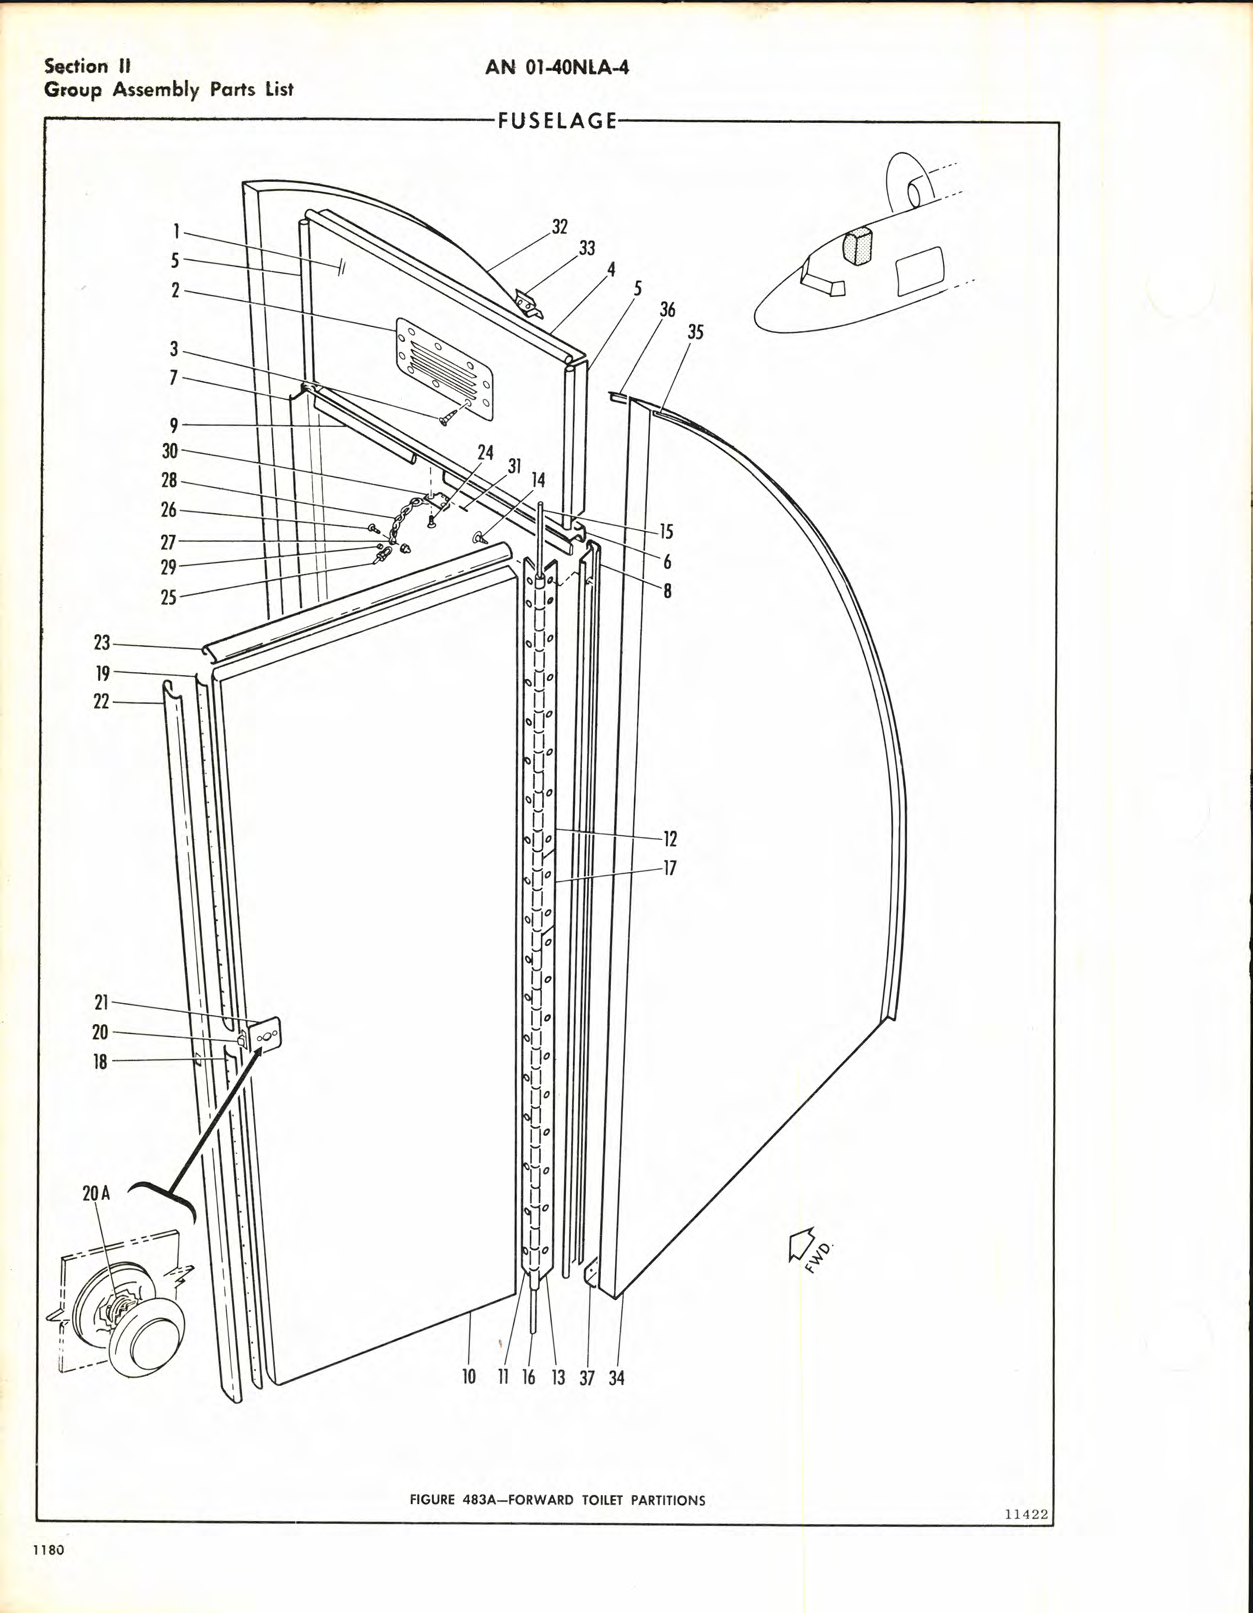 Sample page 6 from AirCorps Library document: Parts Catalog for DC-6 Series